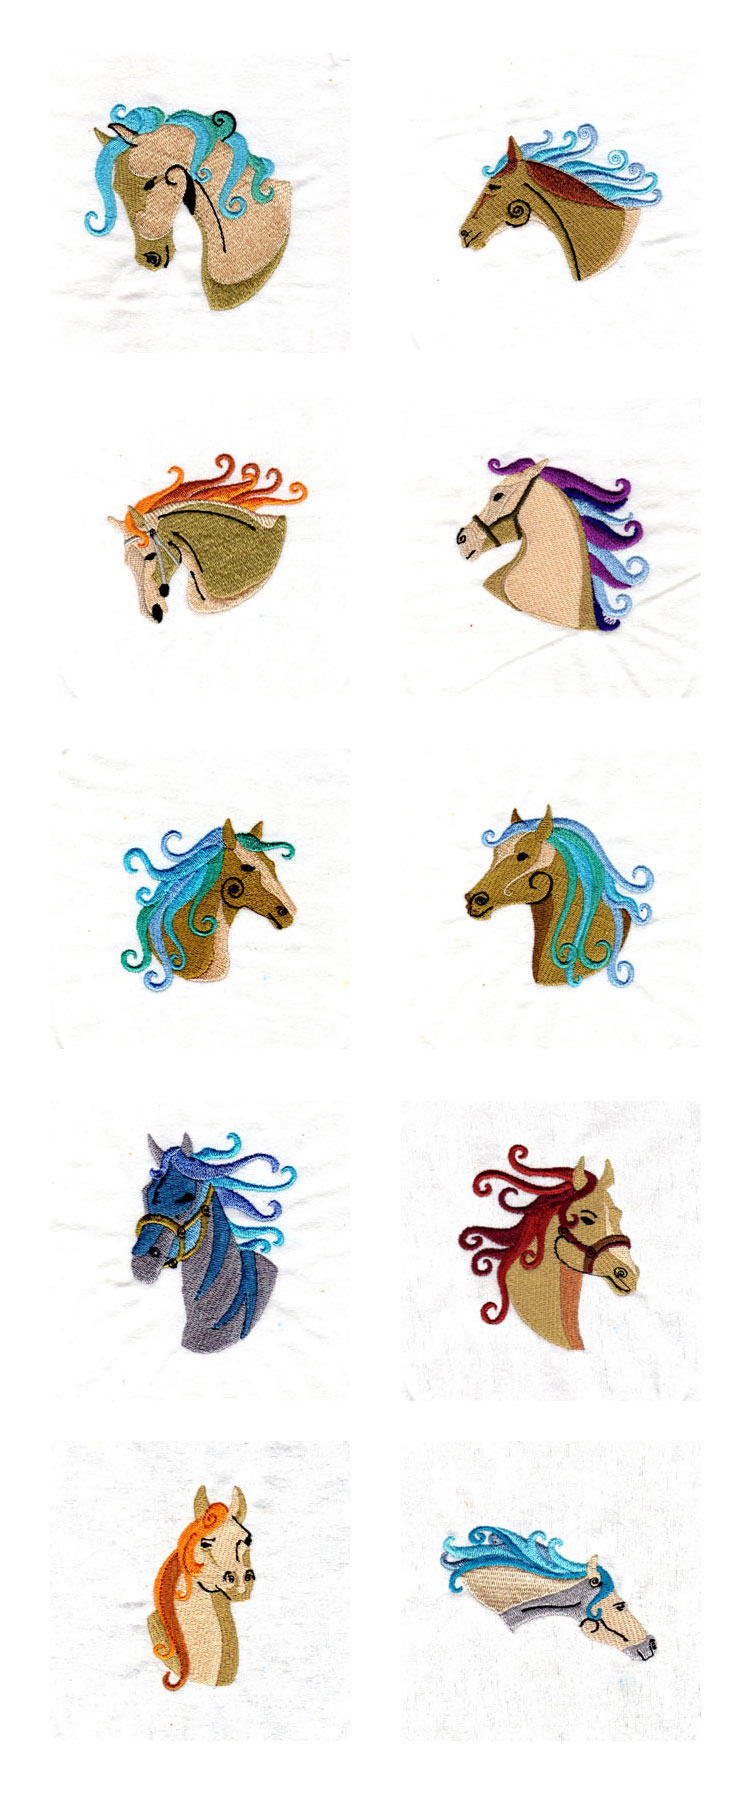 Swirly Horses Embroidery Machine Design Details